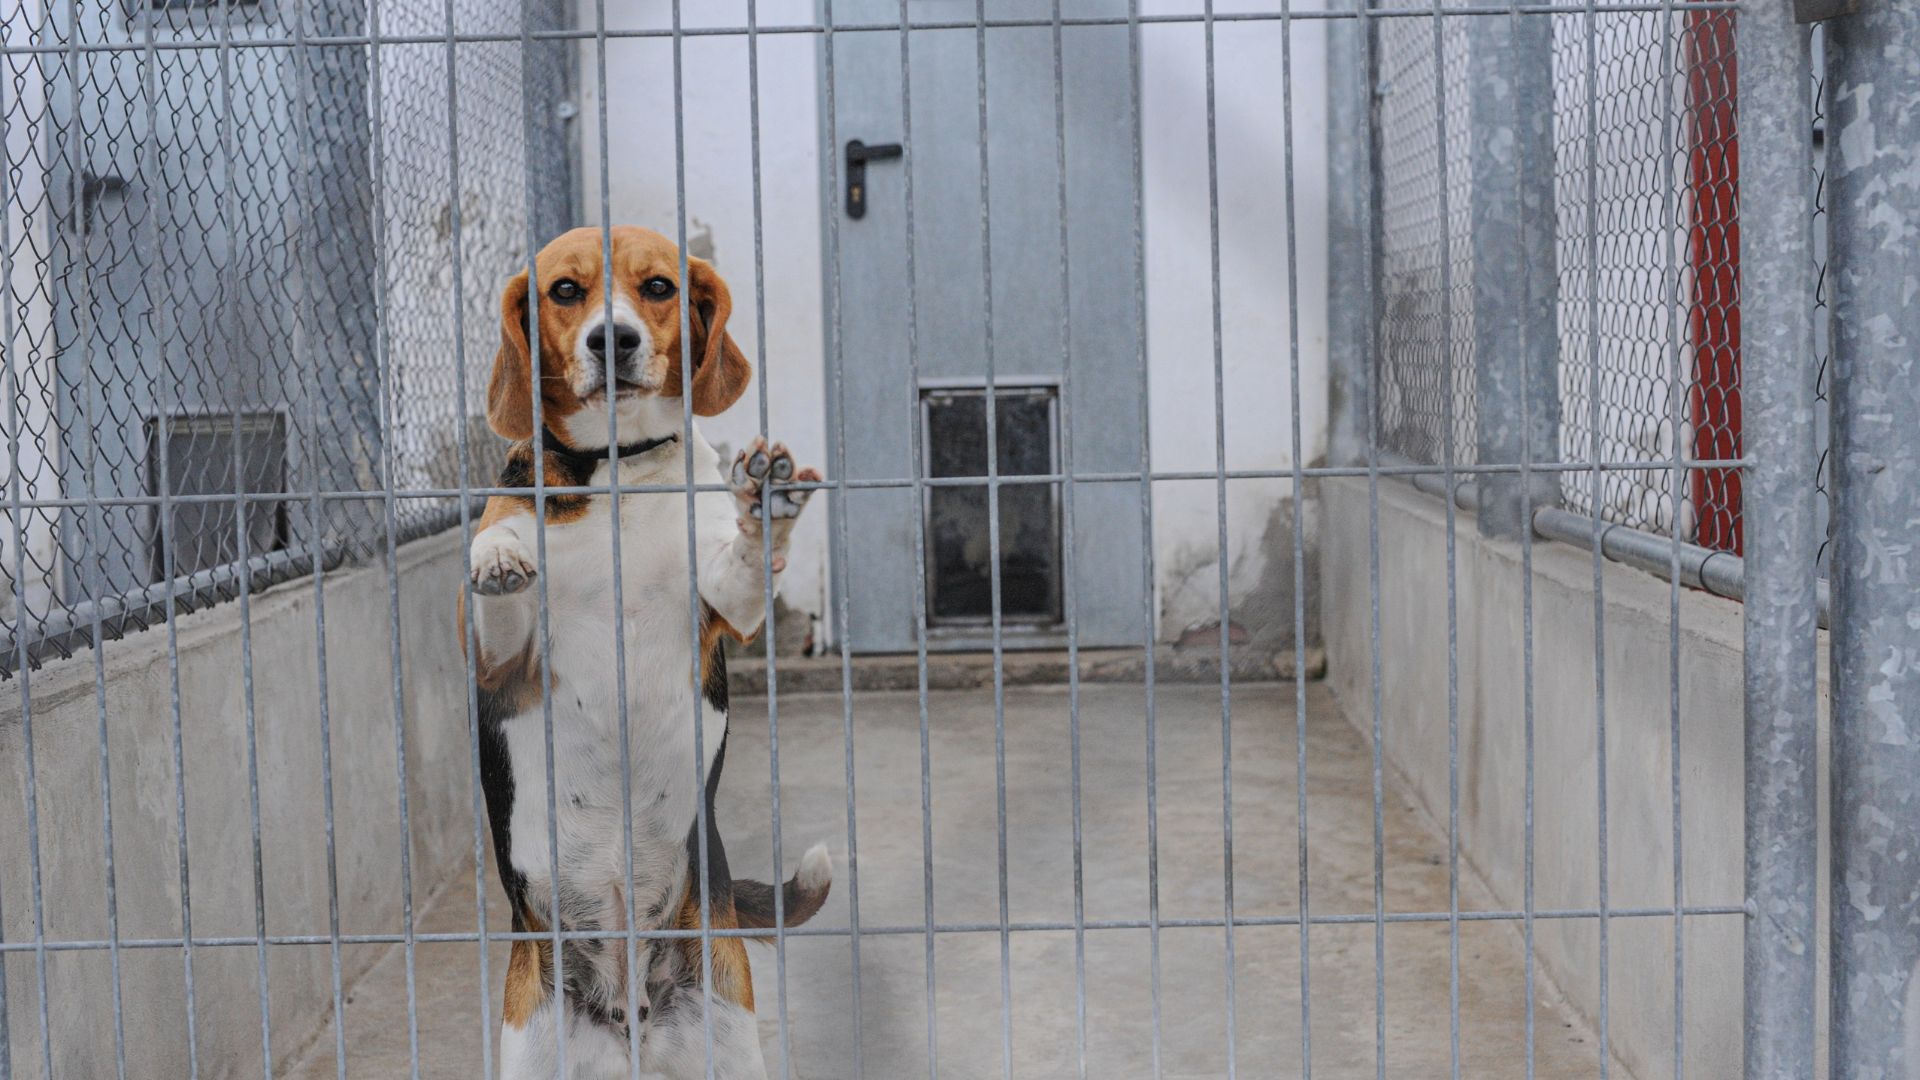 Beagles are social animals, this beagle paces around his empty concrete yard in a scientific research facility in Spain. Image Credit: We Animals Media.